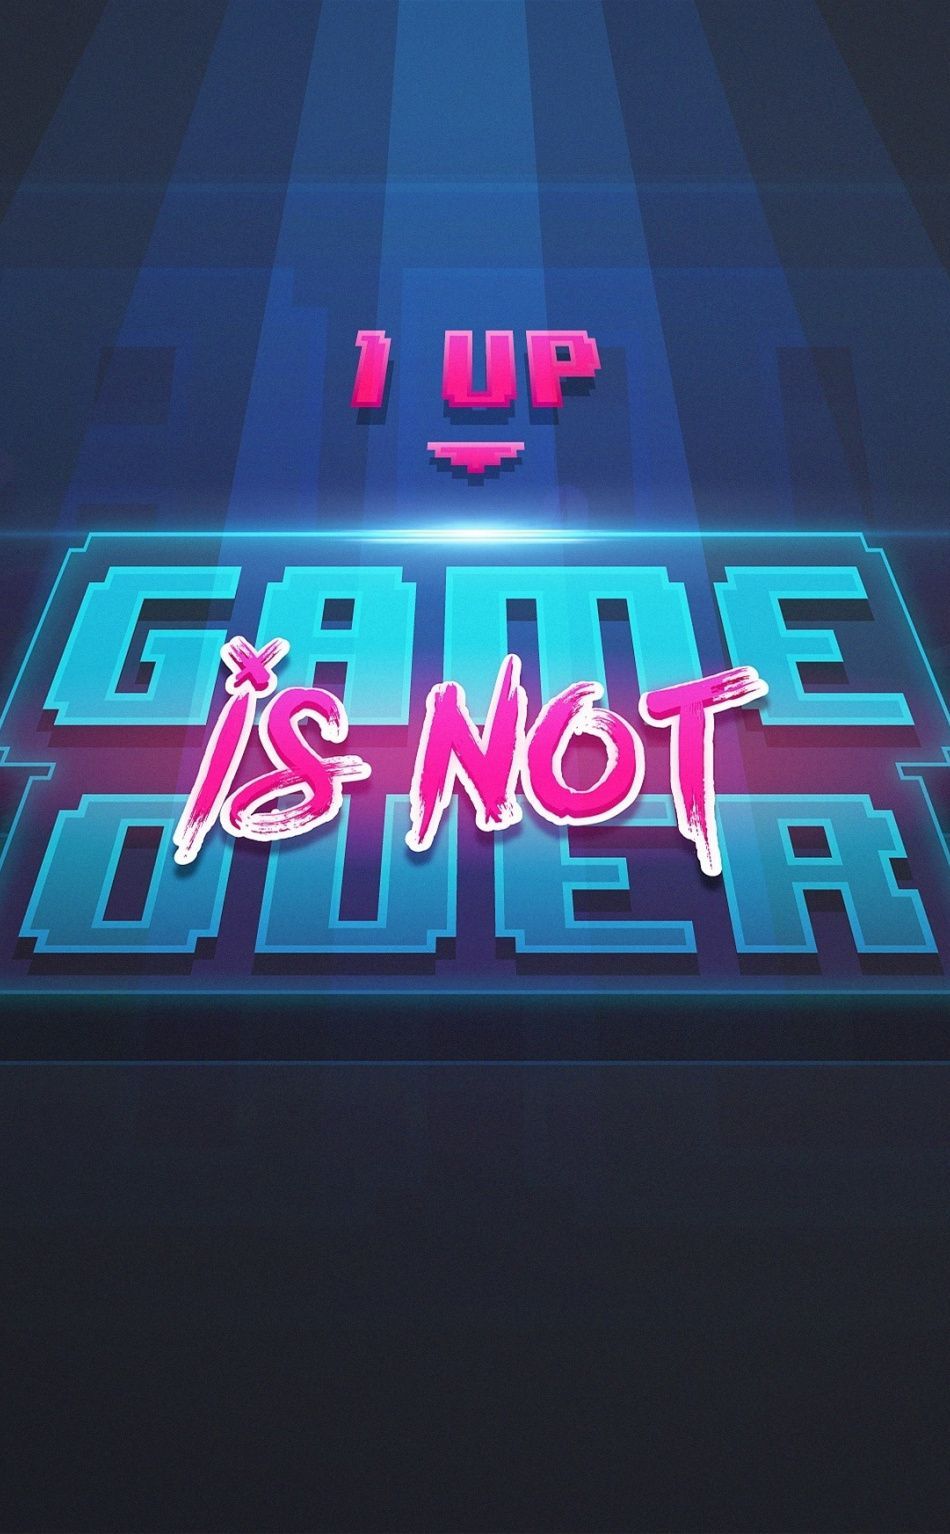 Game over, 1 Up, art, 950x1534 wallpaper. Retro games poster